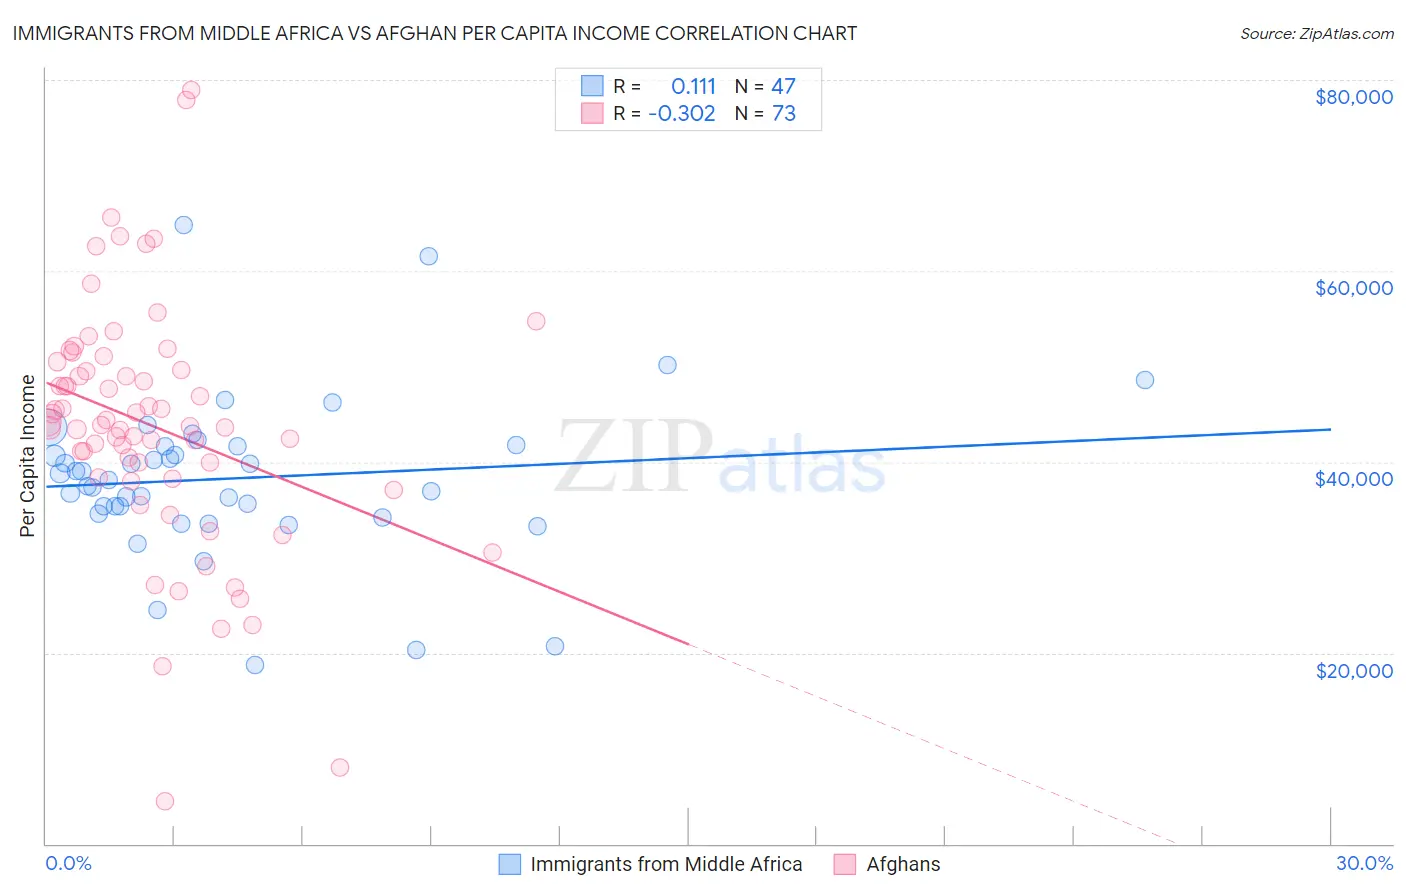 Immigrants from Middle Africa vs Afghan Per Capita Income